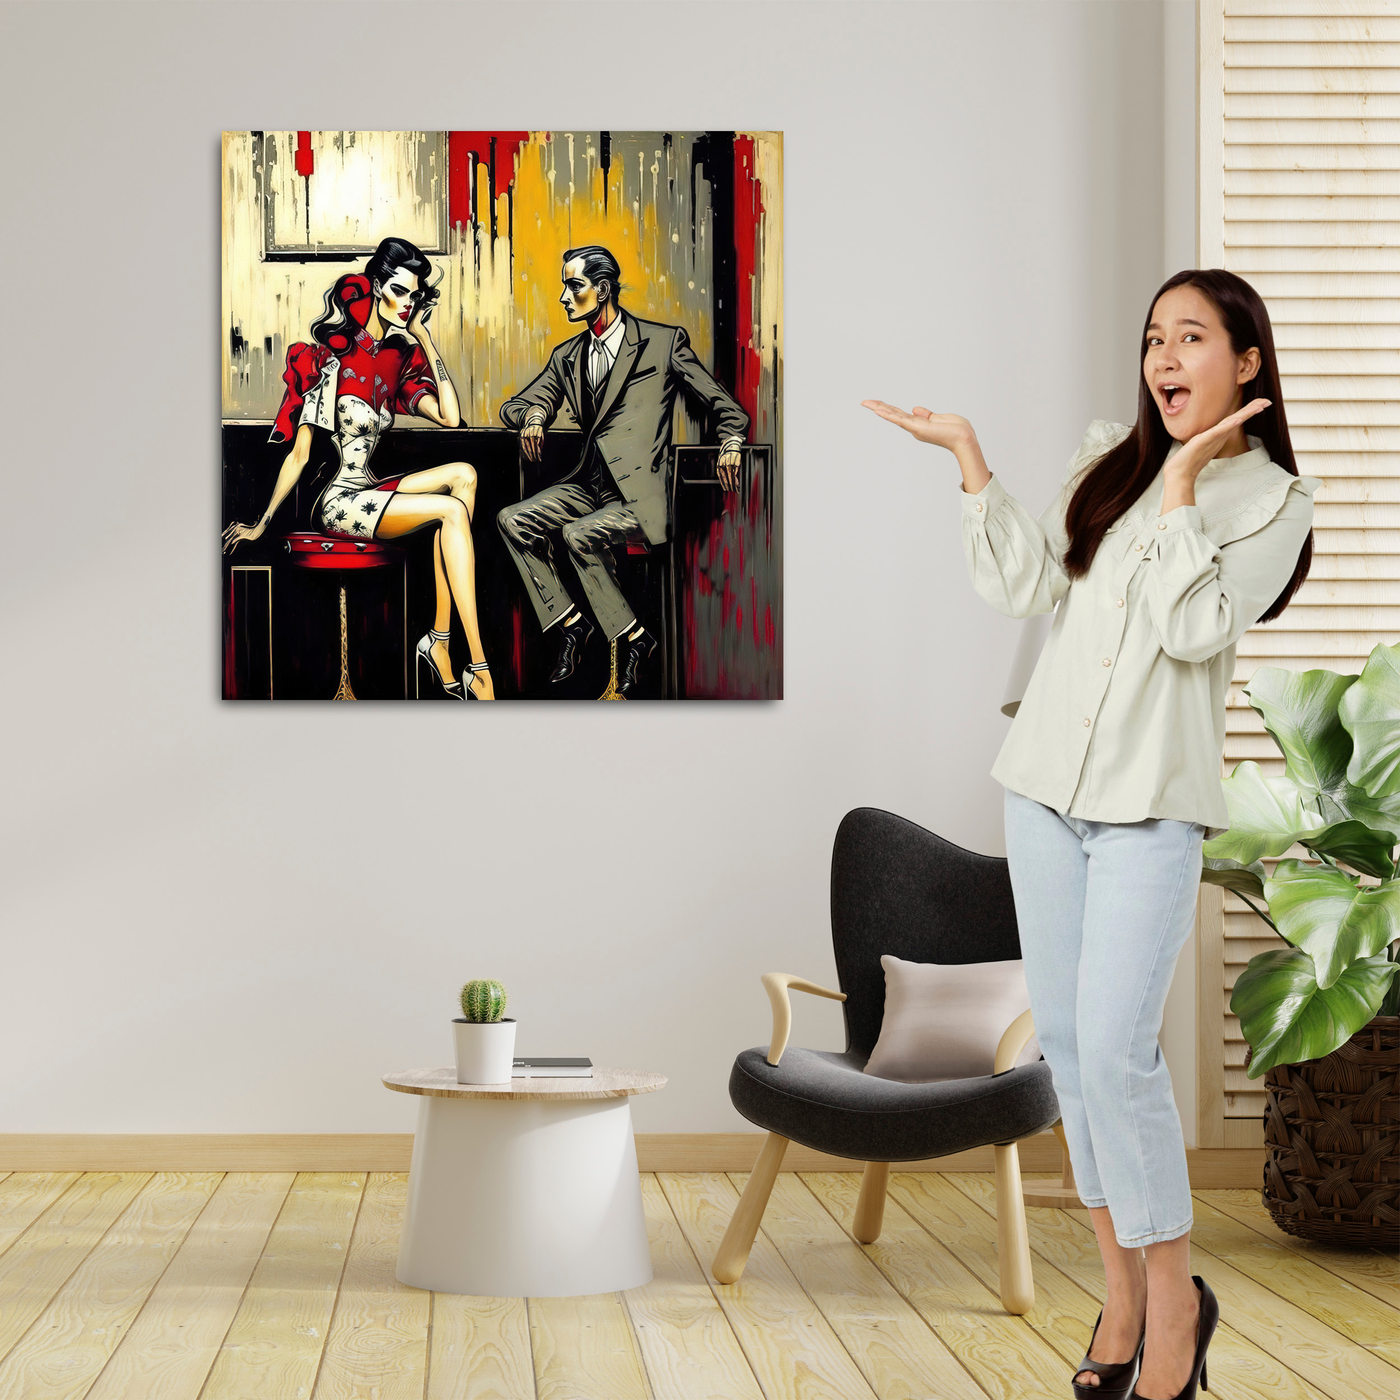 Bar Room Small Talk - Gallery Wrapped Canvas